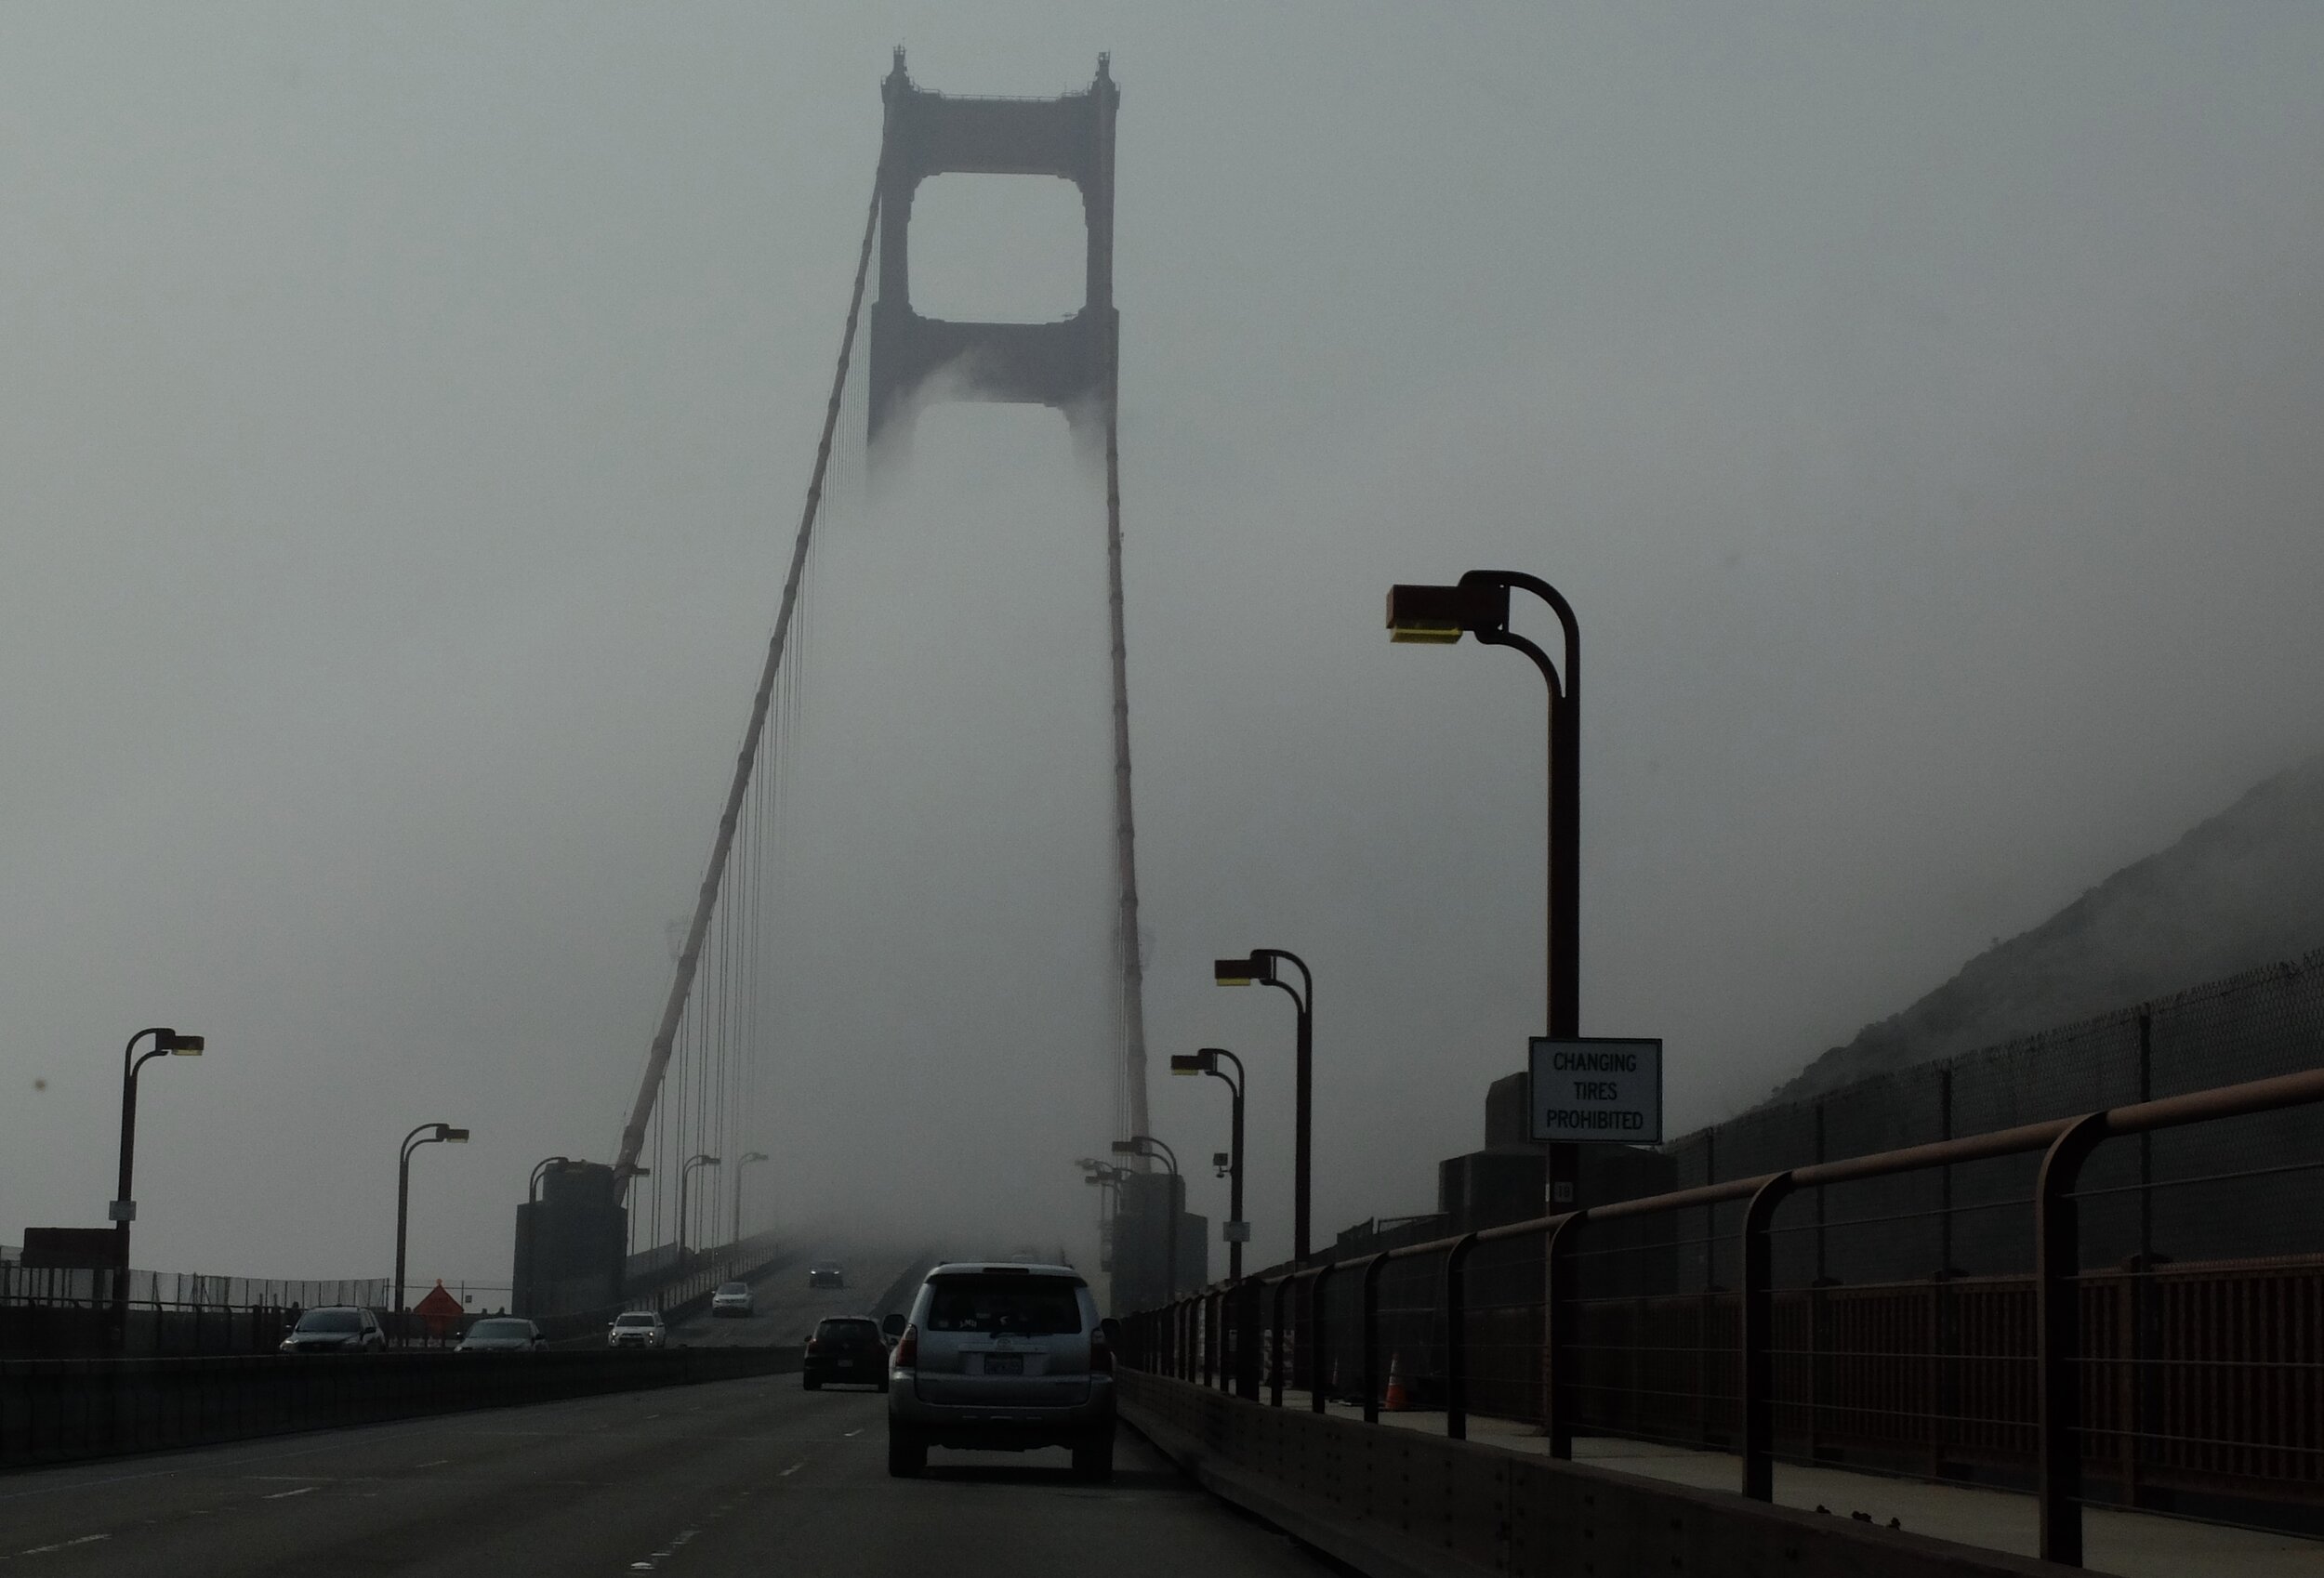 The smoke was above the fog as we crossed the GGB for another trip to San Francisco. It was quiet there.